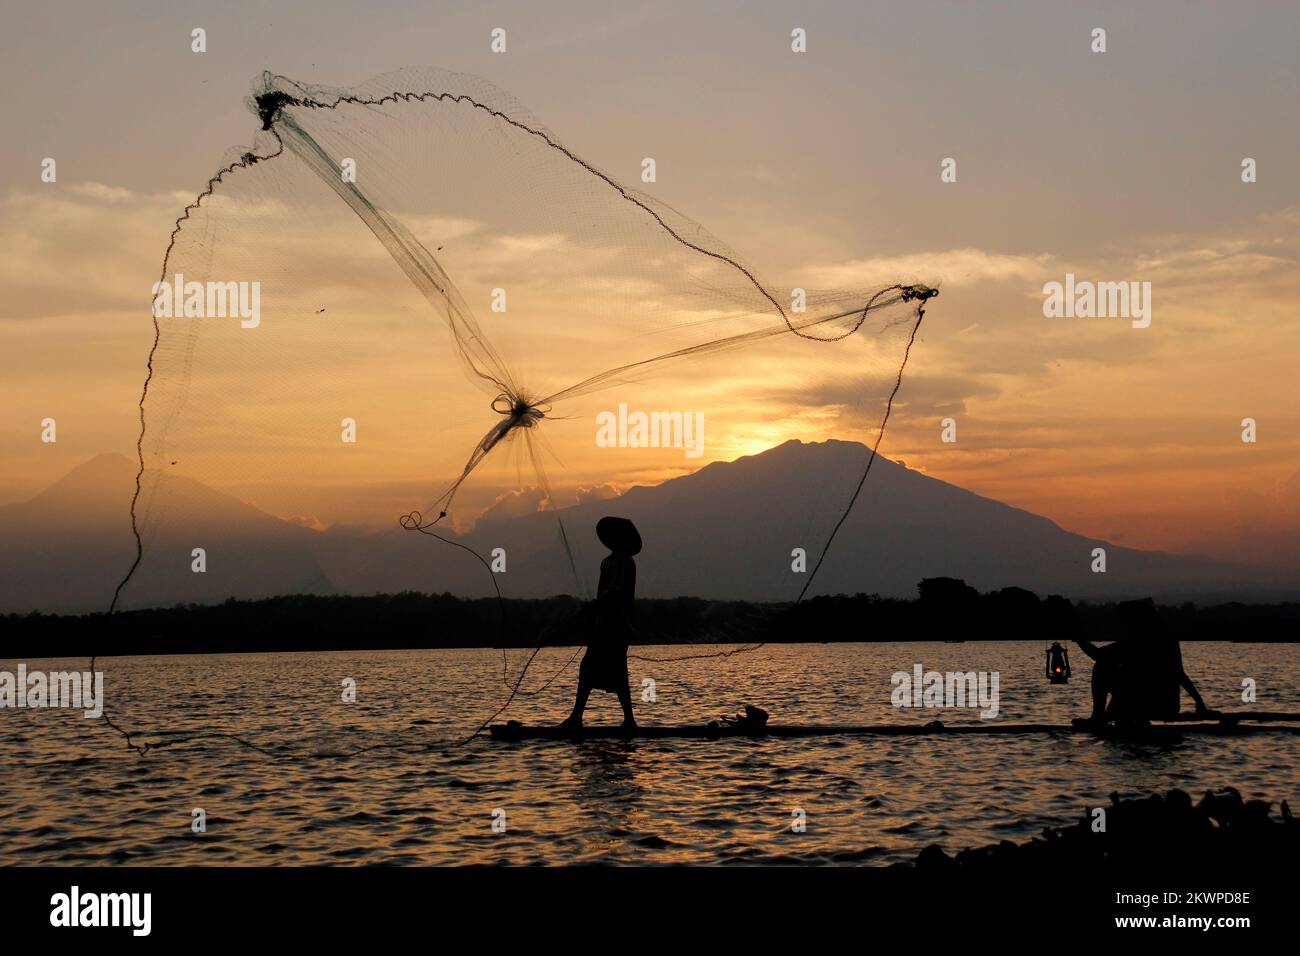 silhouette of a fisherman throwing a net in a reservoir at dusk Stock Photo  - Alamy